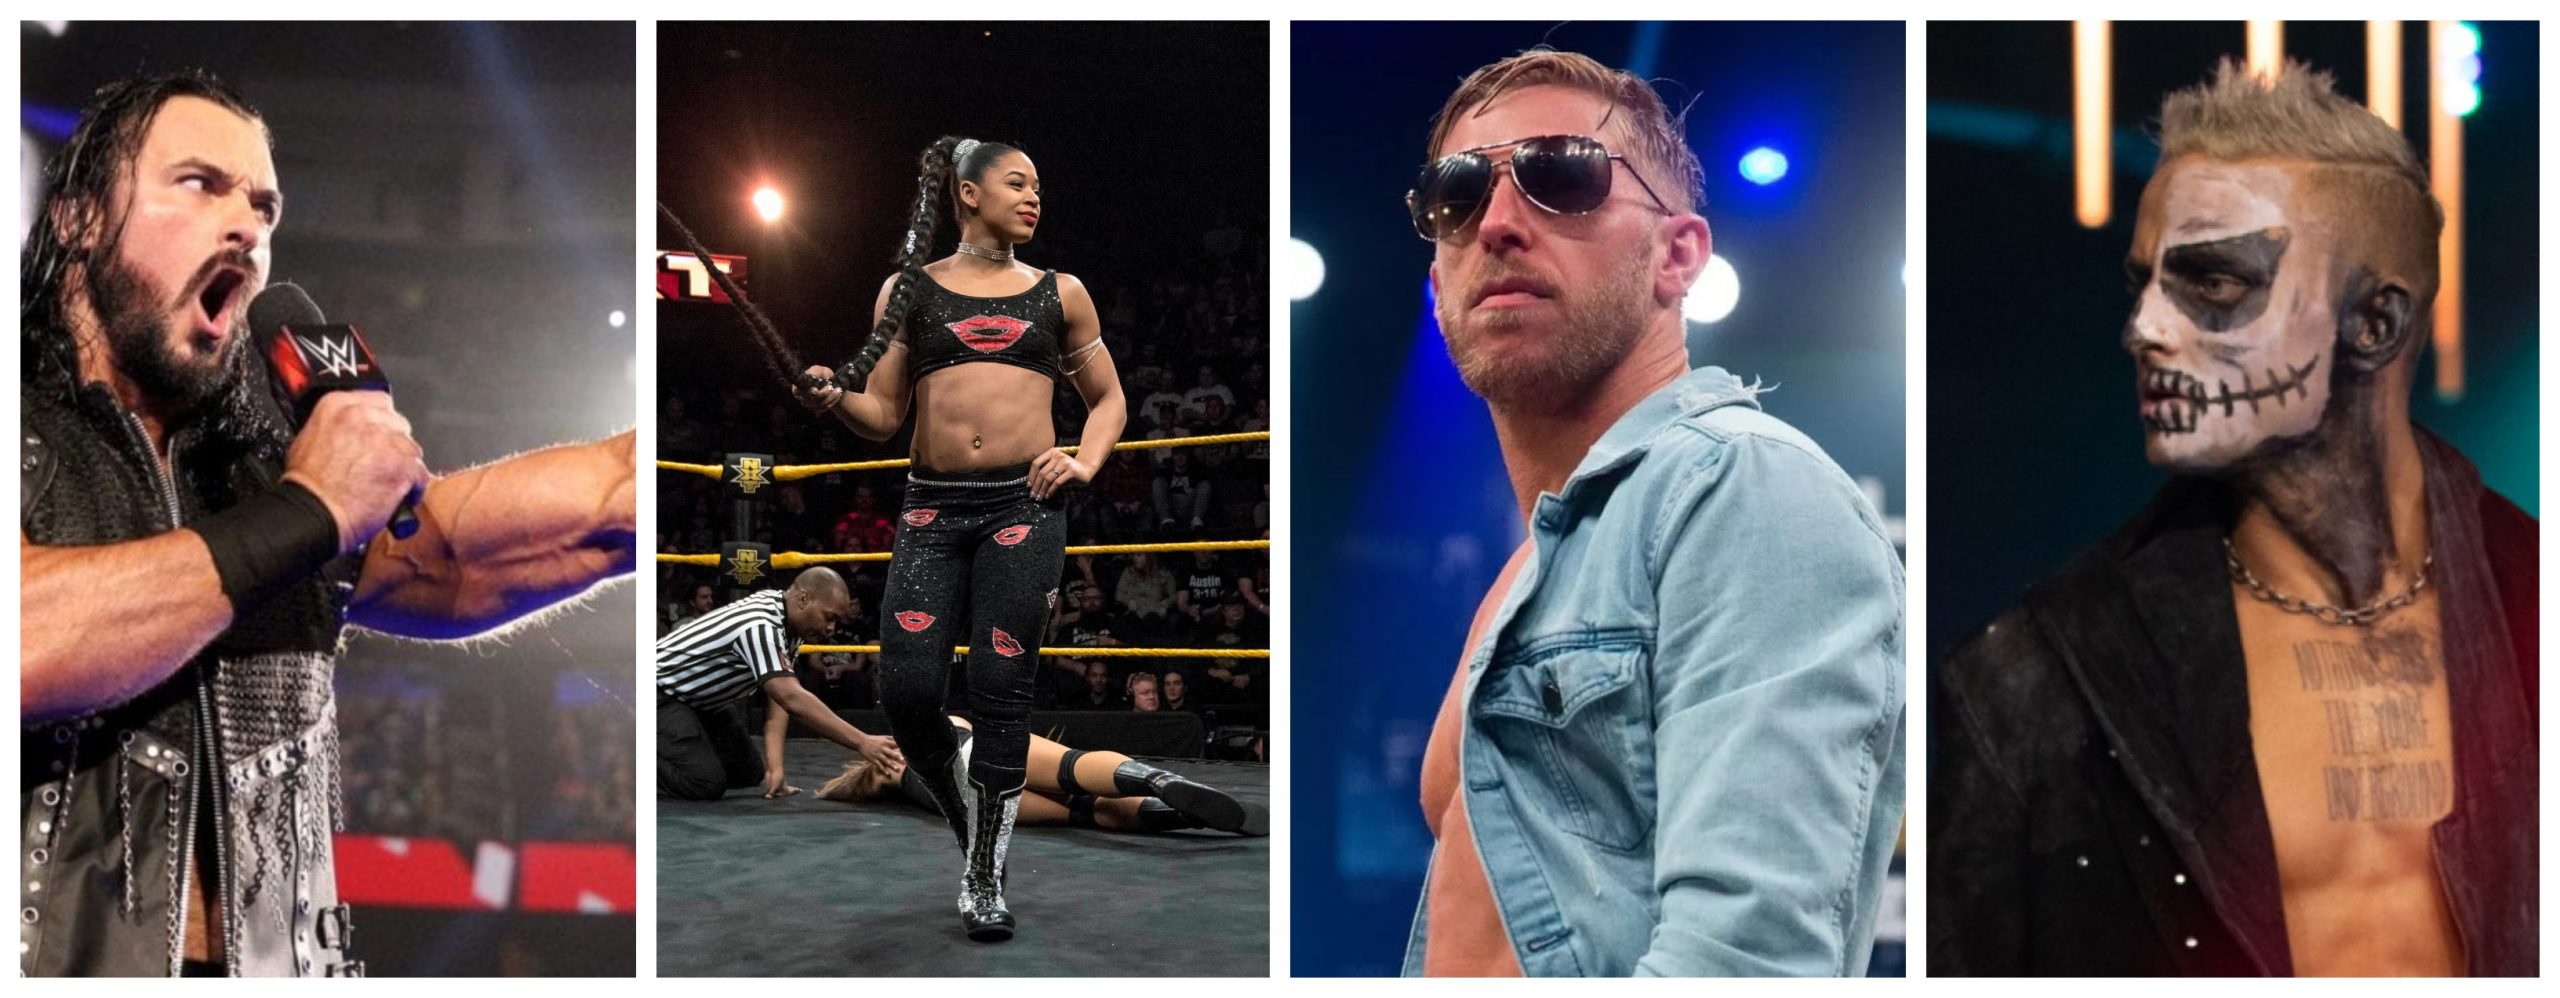 The WWE and AEW stars poised to break through in 2020